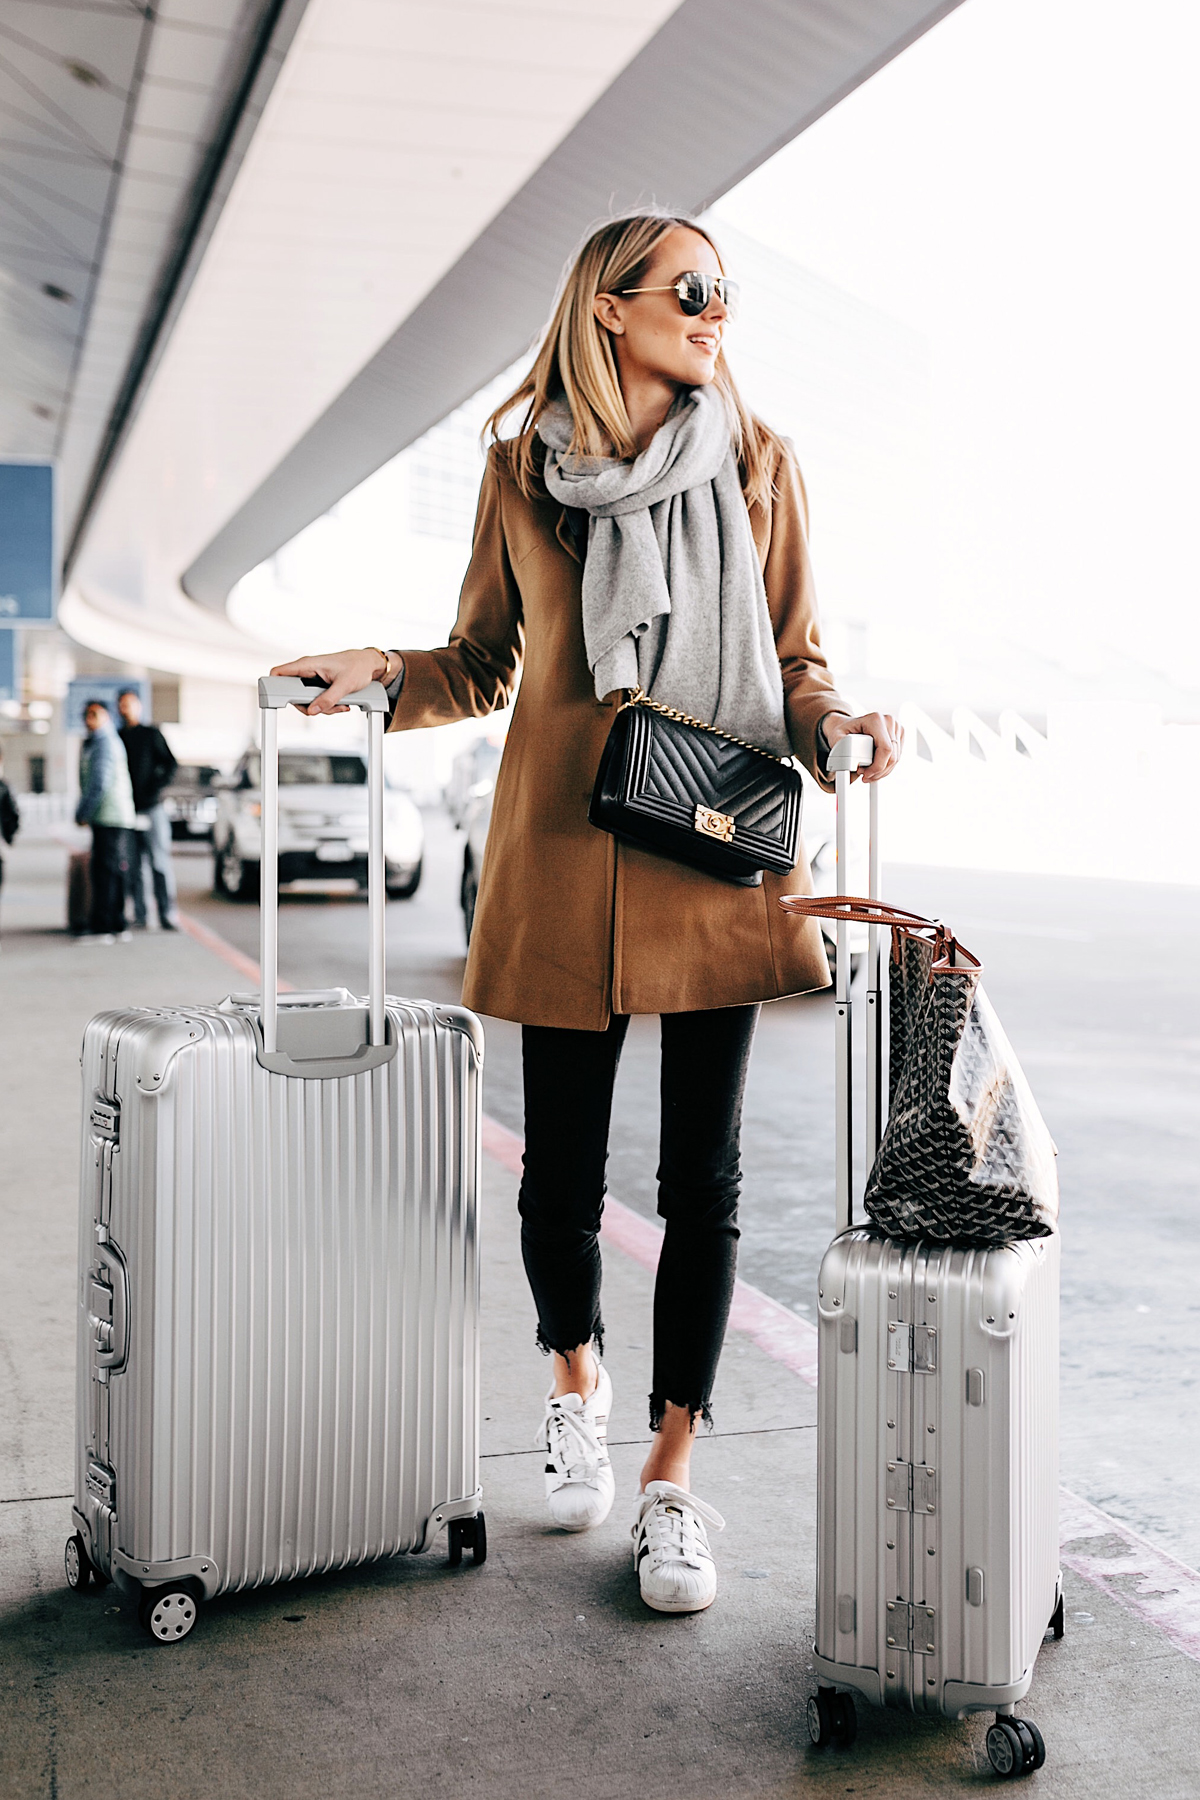 Blonde Woman with Rimowa Luggage at Airport Fashion Jackson